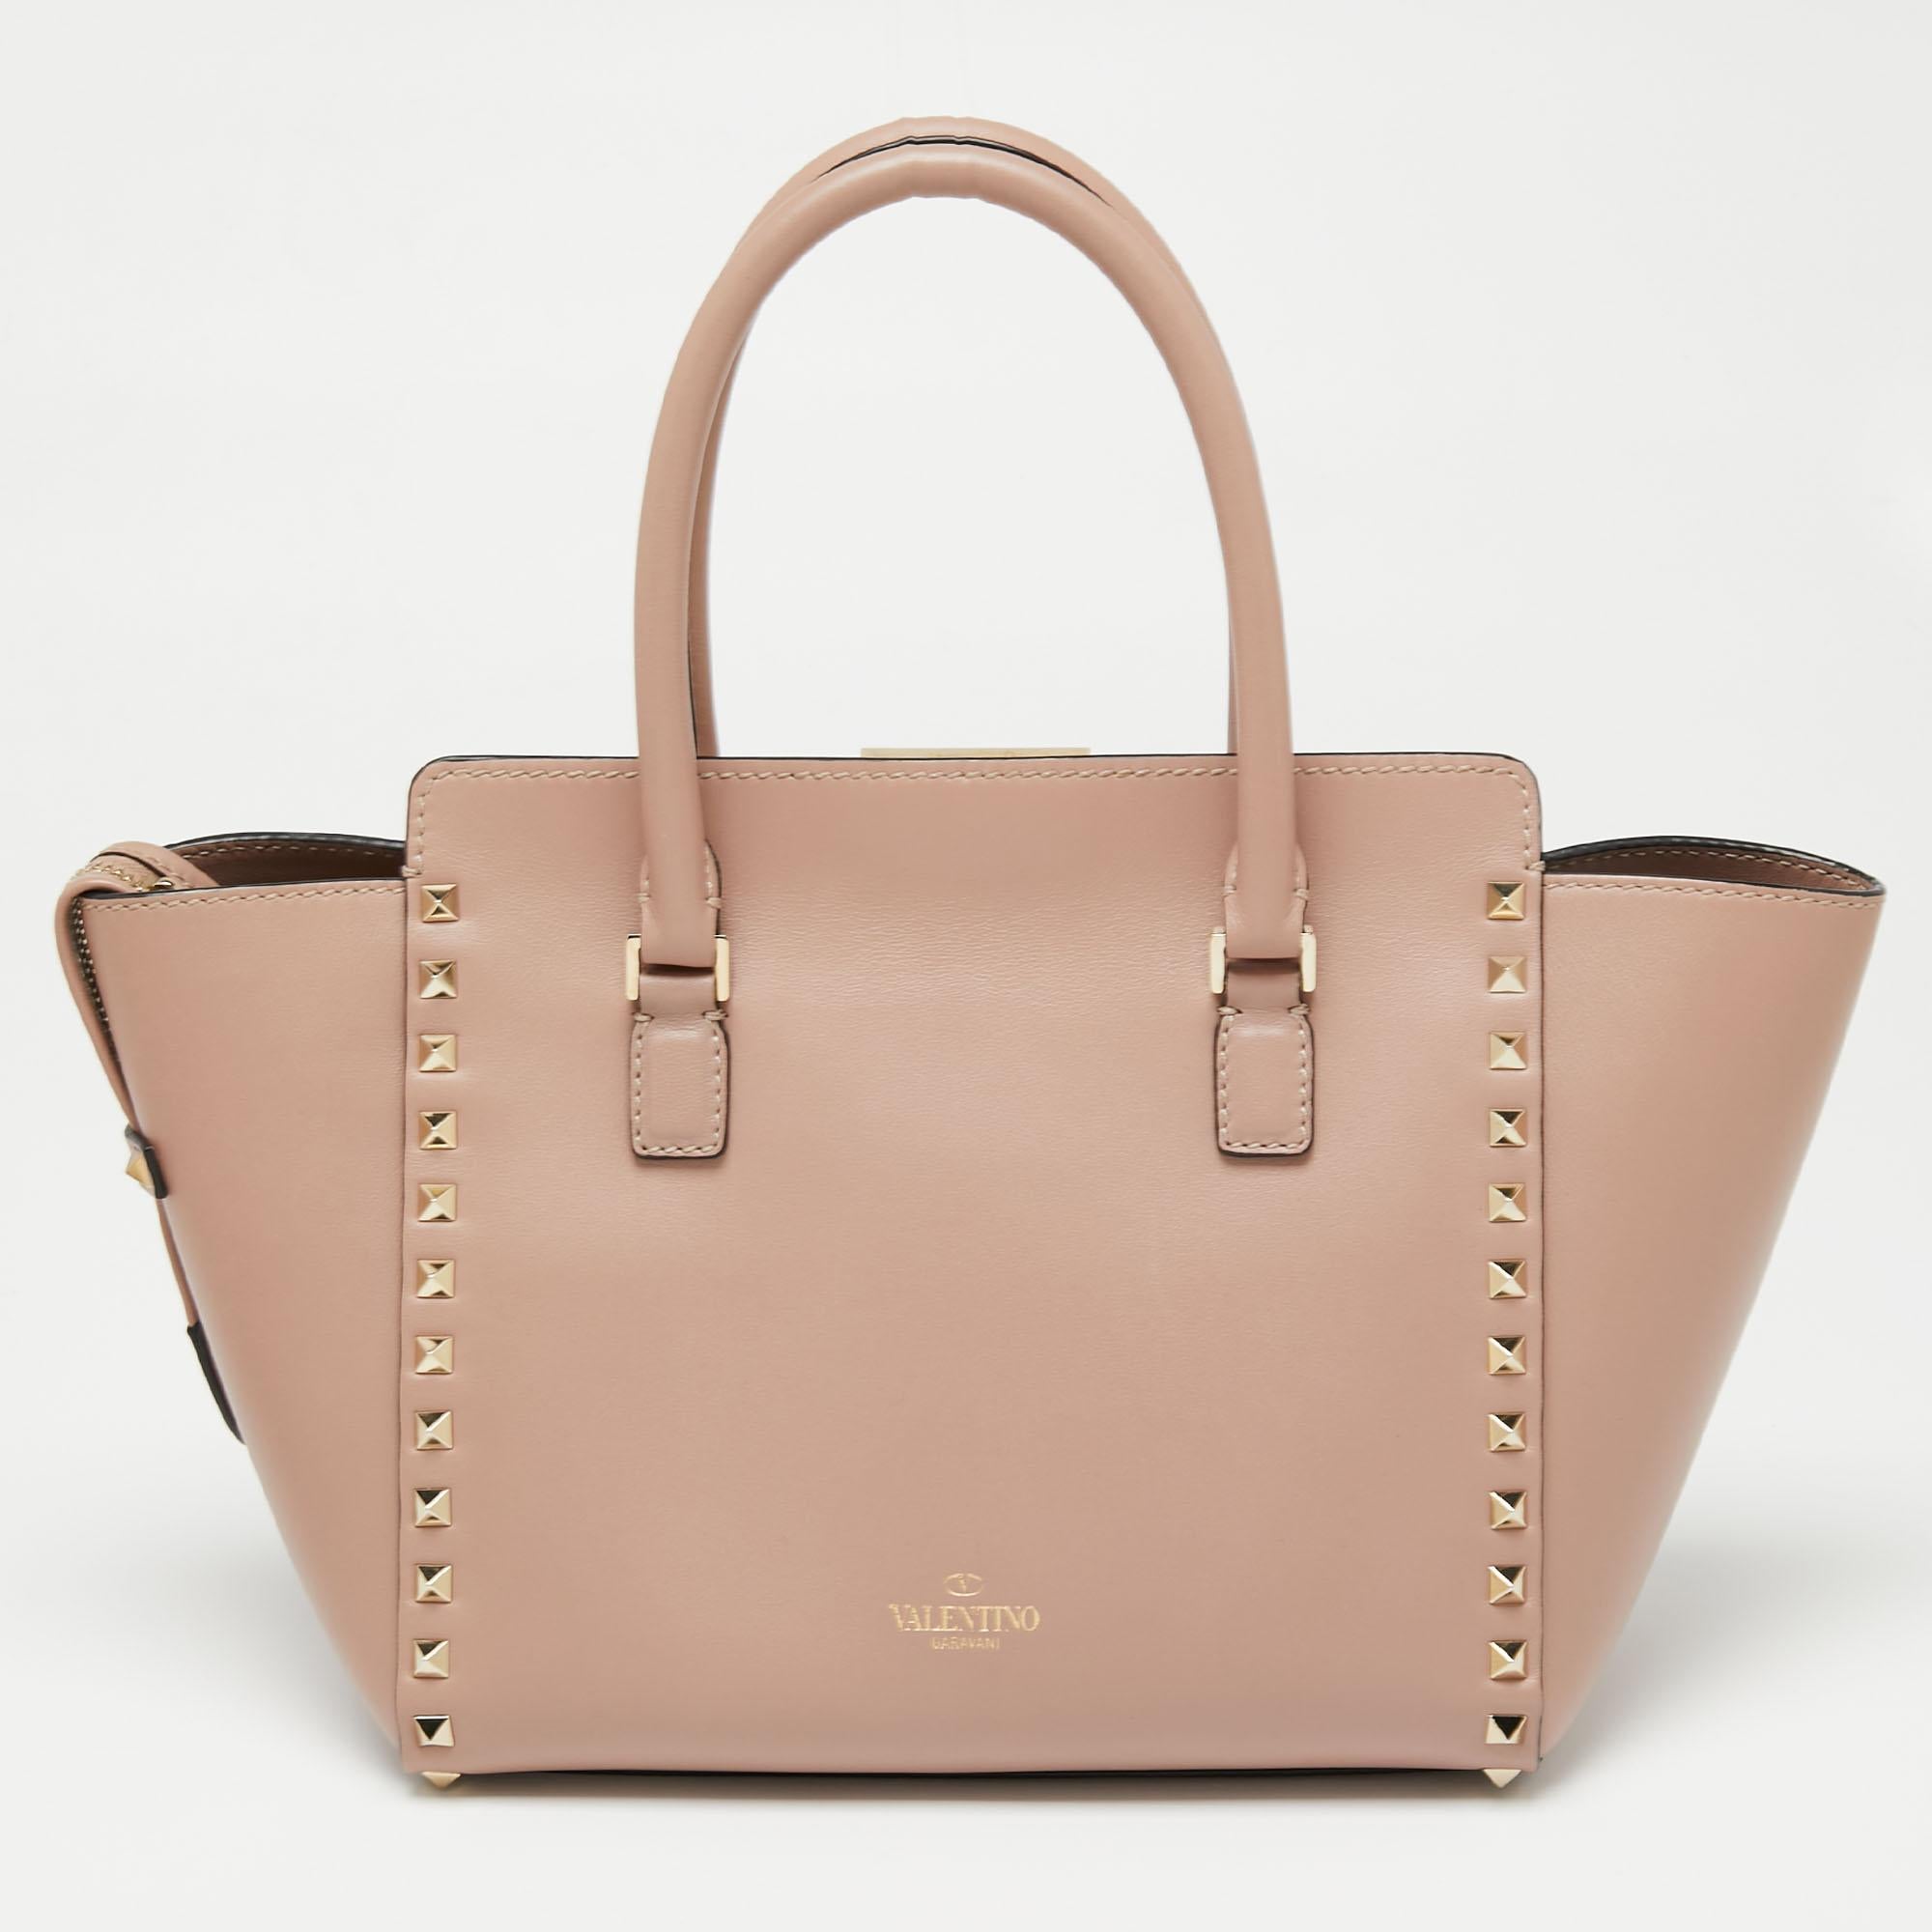 Luxury Italian fashion house Valentino is famed for its classic designs infused with its own signature modern edge and Rockstud details as showcased by this trapeze tote. Crafted from leather, it features top handles and a detachable shoulder strap